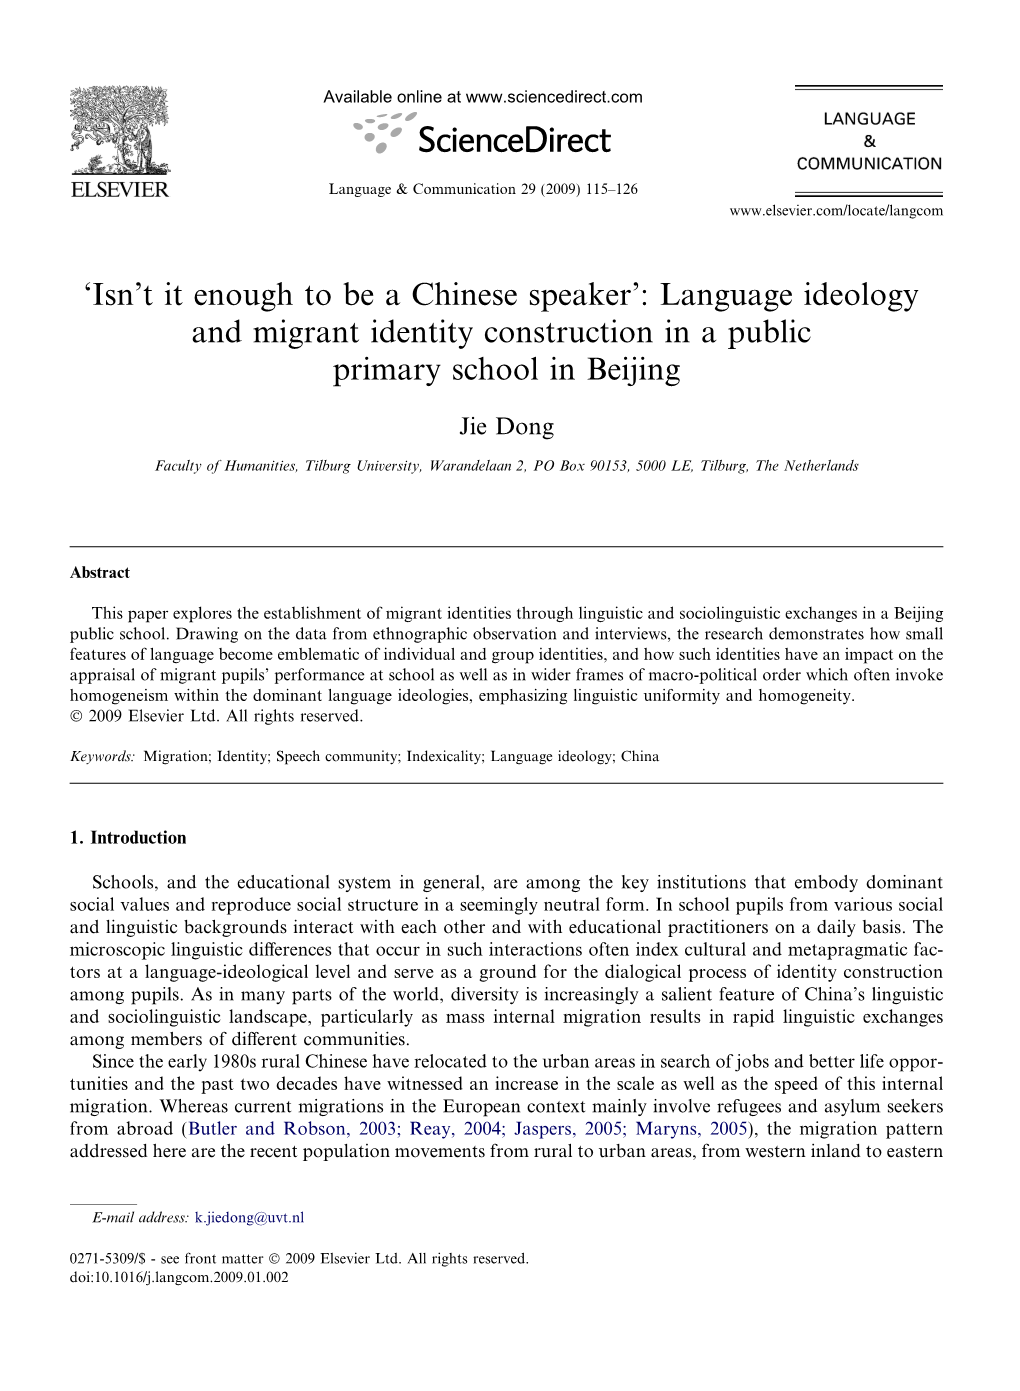 'Isn't It Enough to Be a Chinese Speaker': Language Ideology and Migrant Identity Construction in a Public Primary School